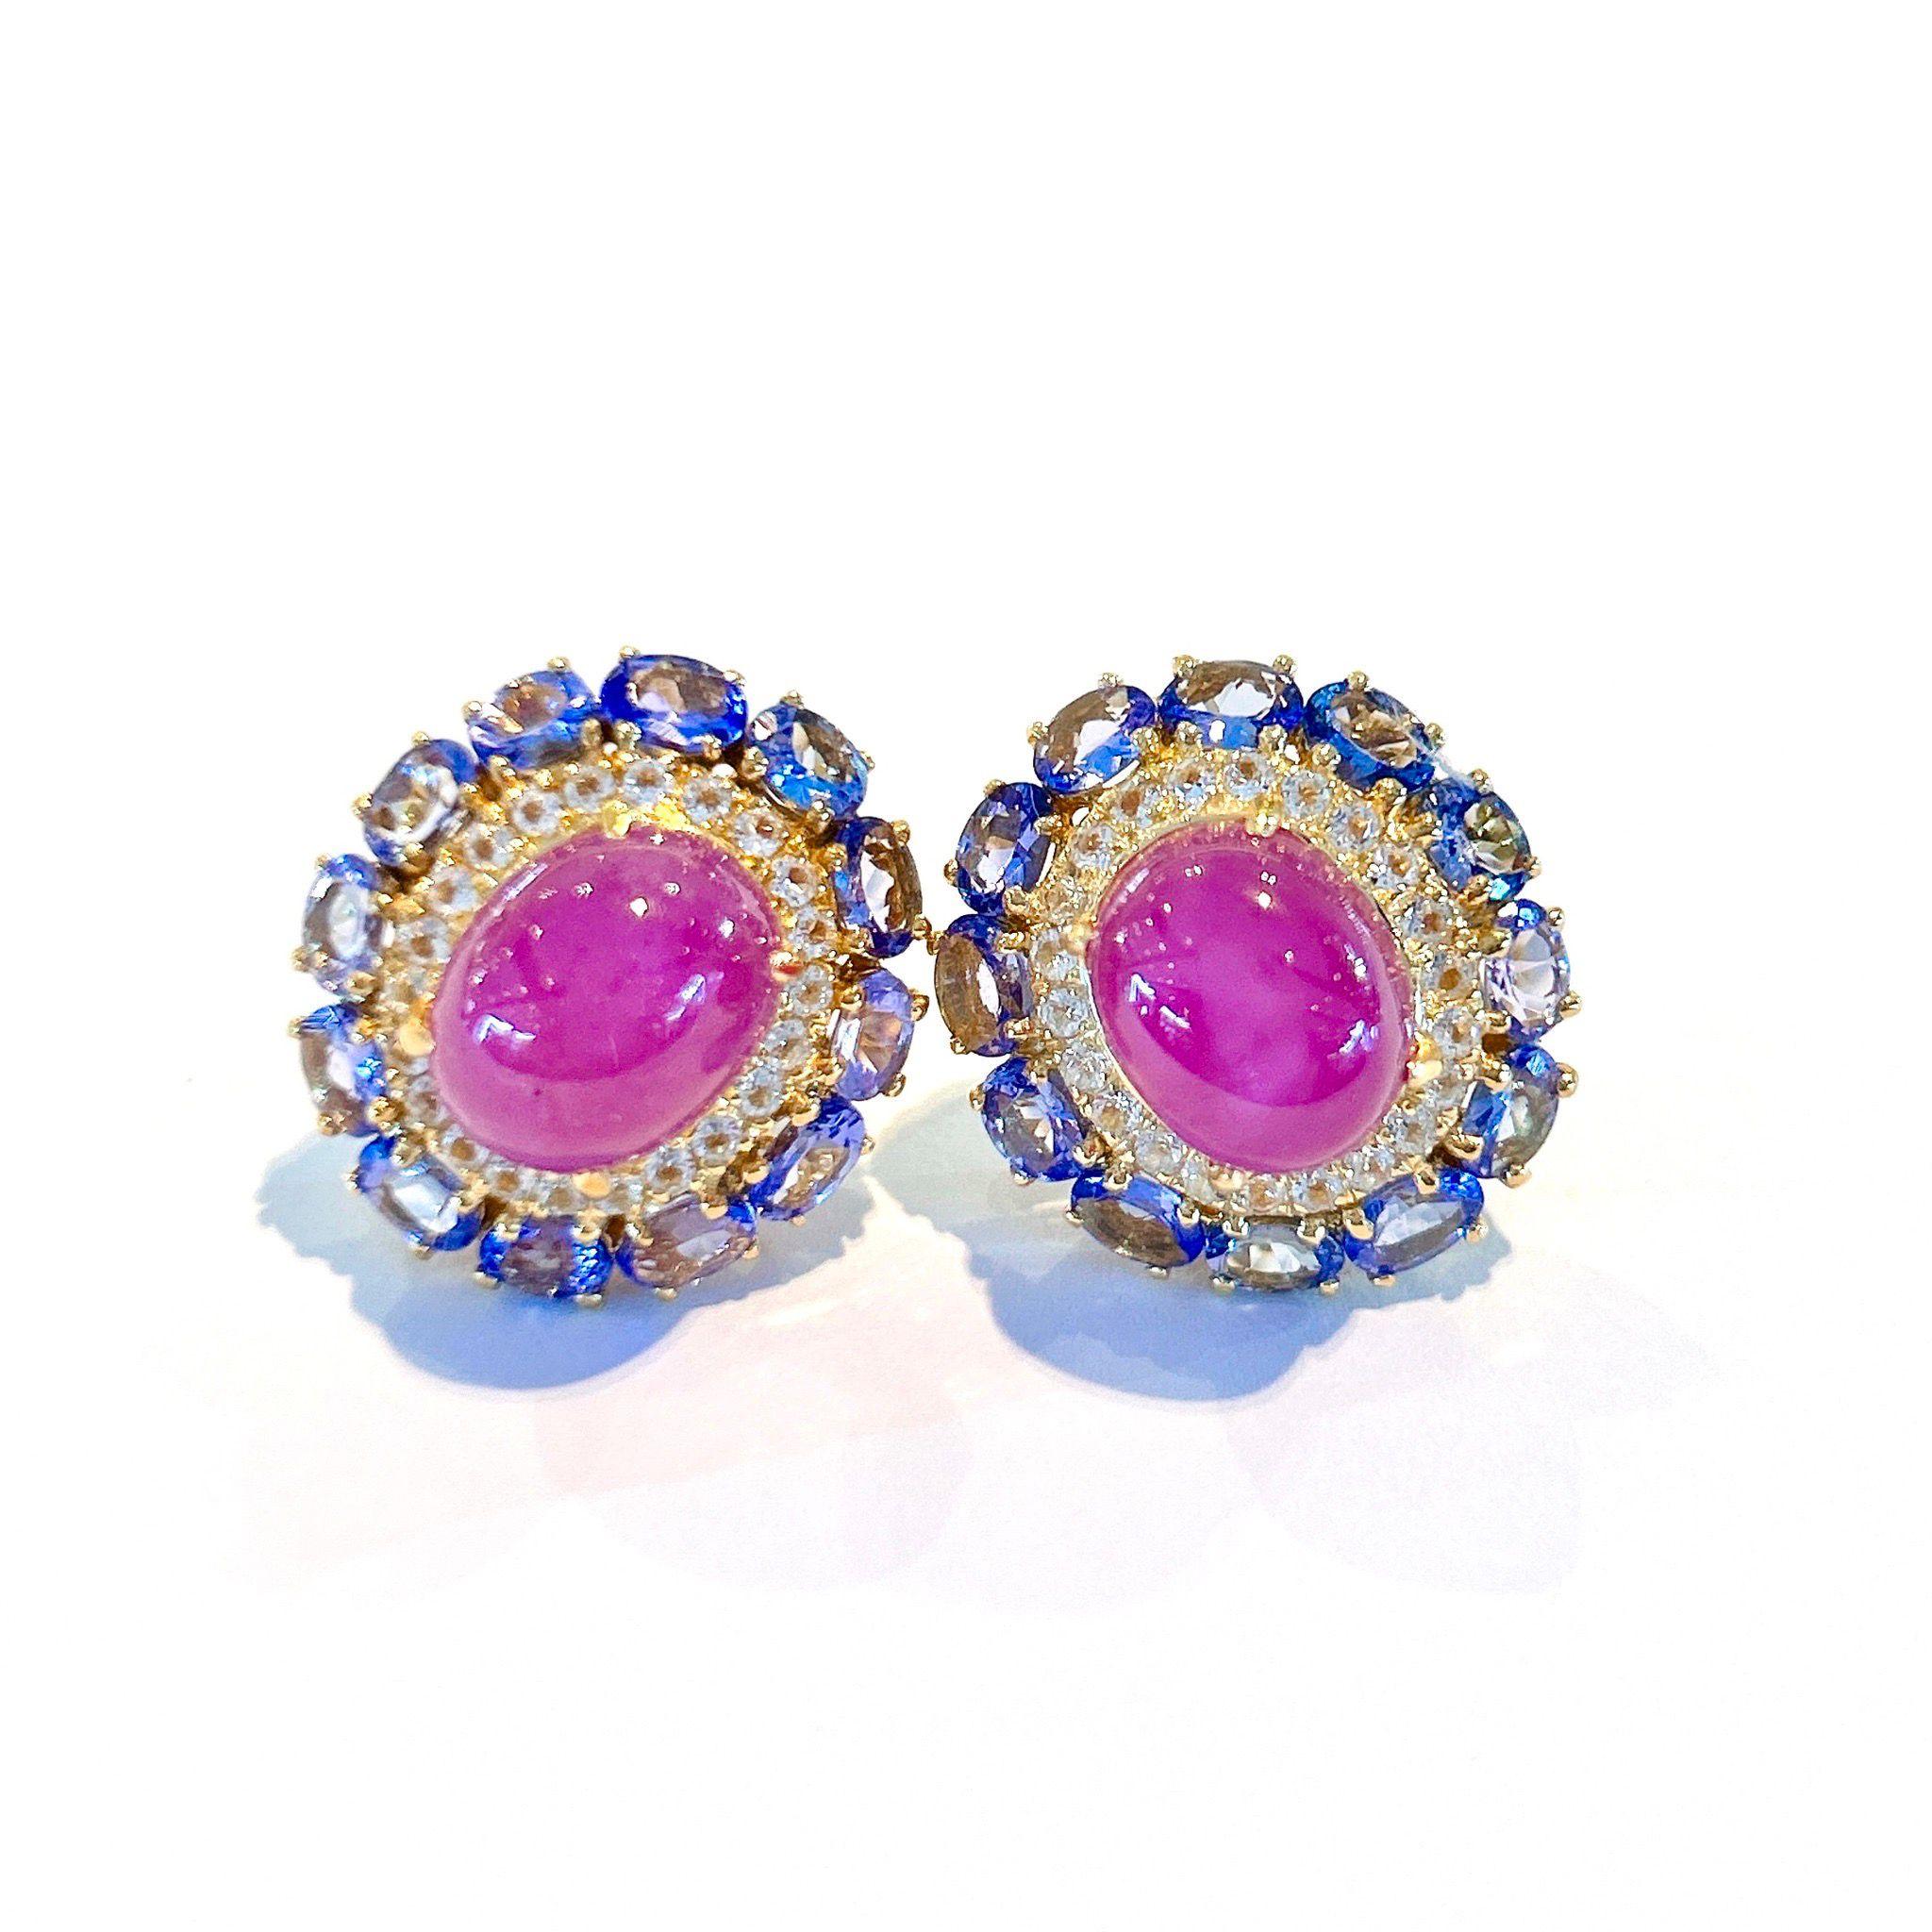 Bochic “Capri” Multi Natural Gem Earrings 
Earrings:
Natural Ruby, Colors - Red, Pink, 15 Carats 
Natural Tanzanite - Colors, Purple, 12 Carats 
Natural White Topaz  - 10 Carats 
Set in 22K Gold and Silver 
Back Posts, can add clip ons 
This